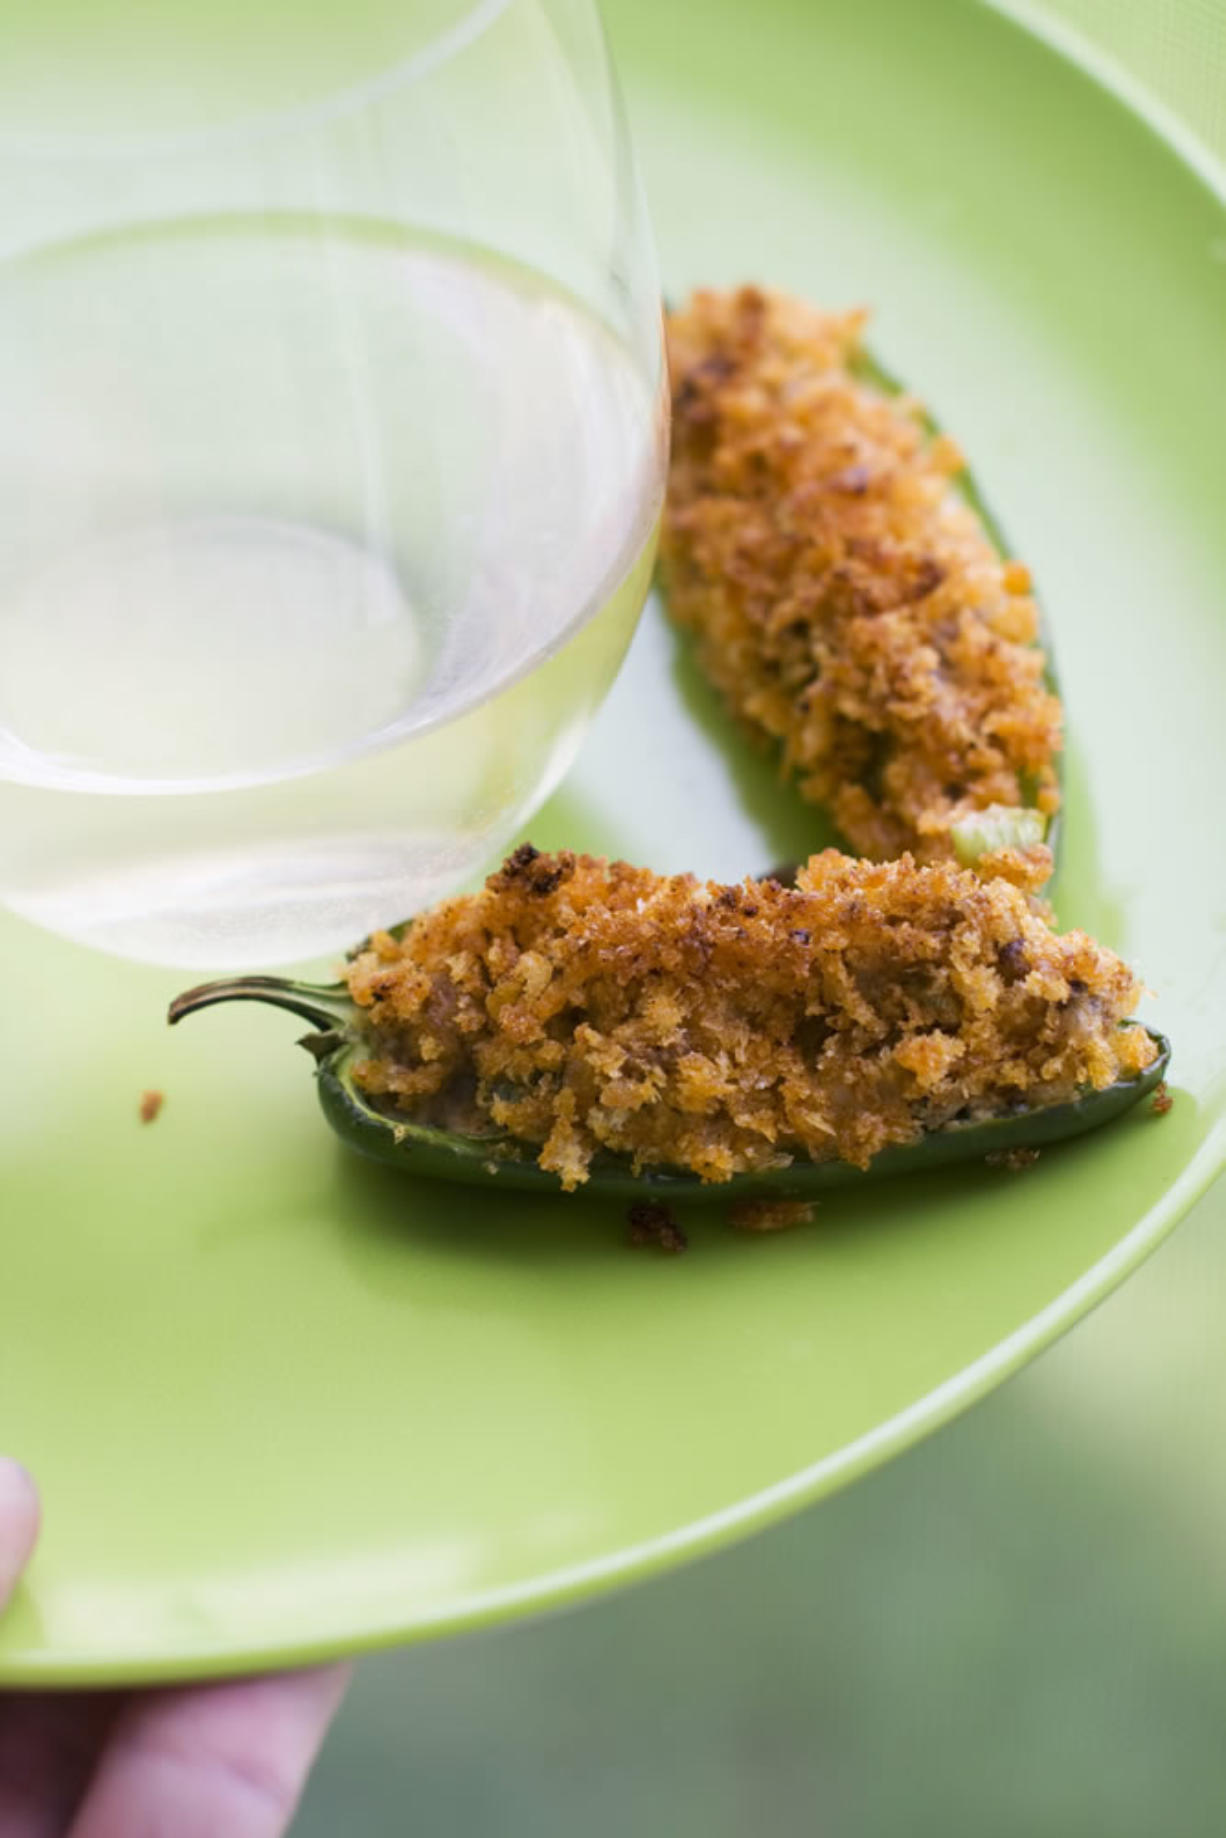 Cheesy sausage-stuffed jalapeno peppers make a great side to a grilled entree or a snack while watching sports.